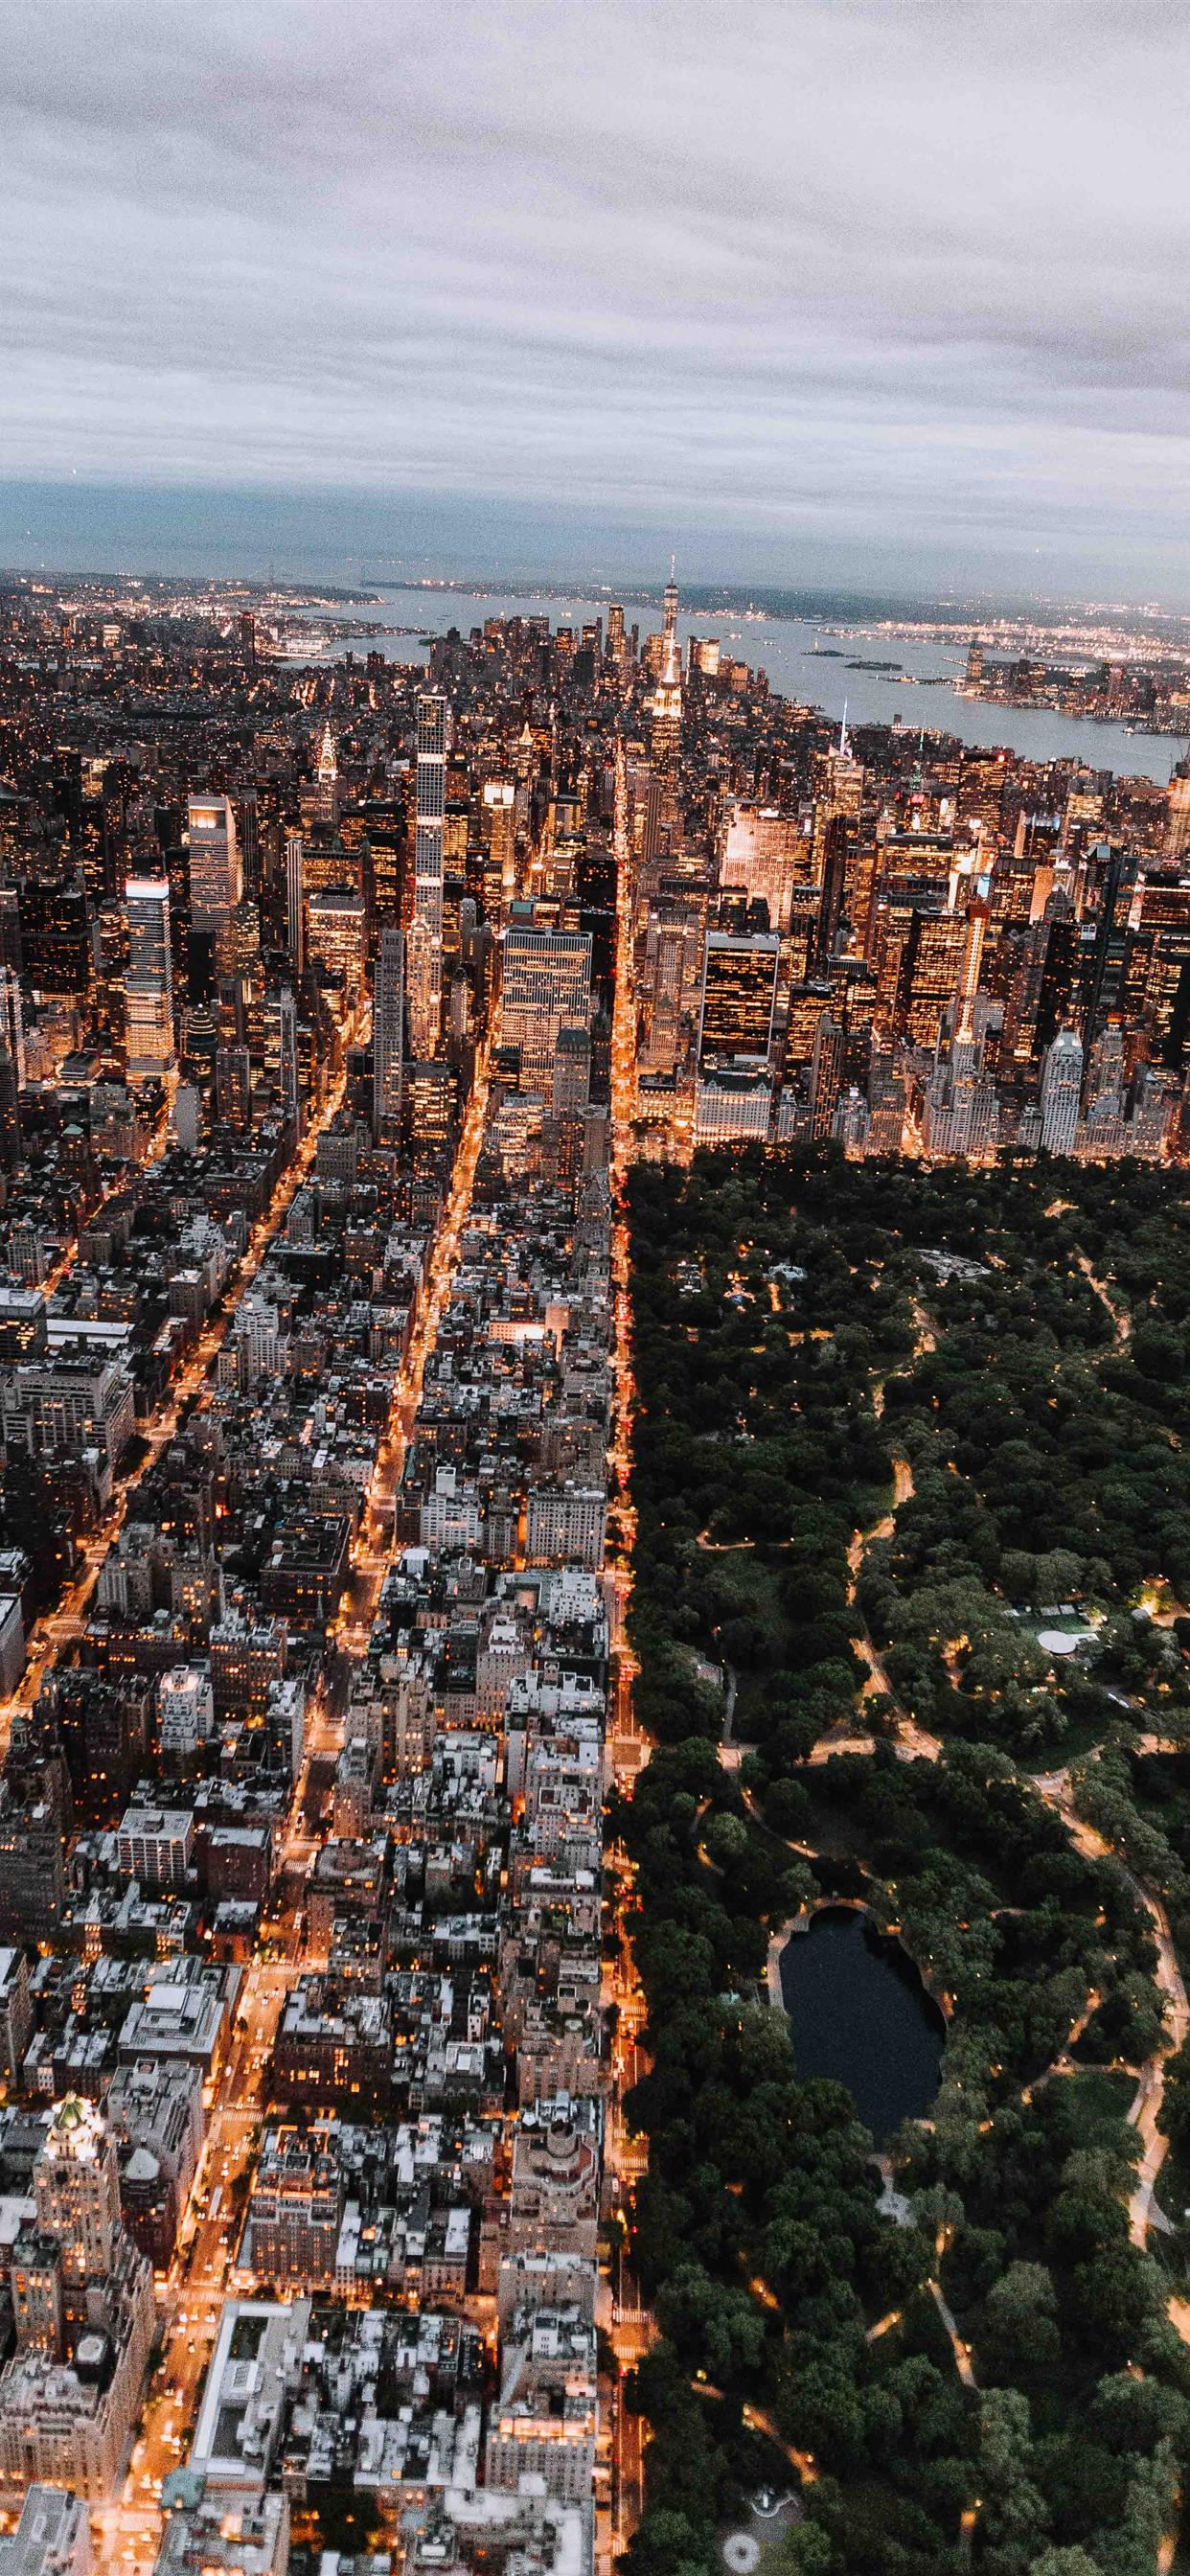 Aerial view of the city at night - Travel, New York